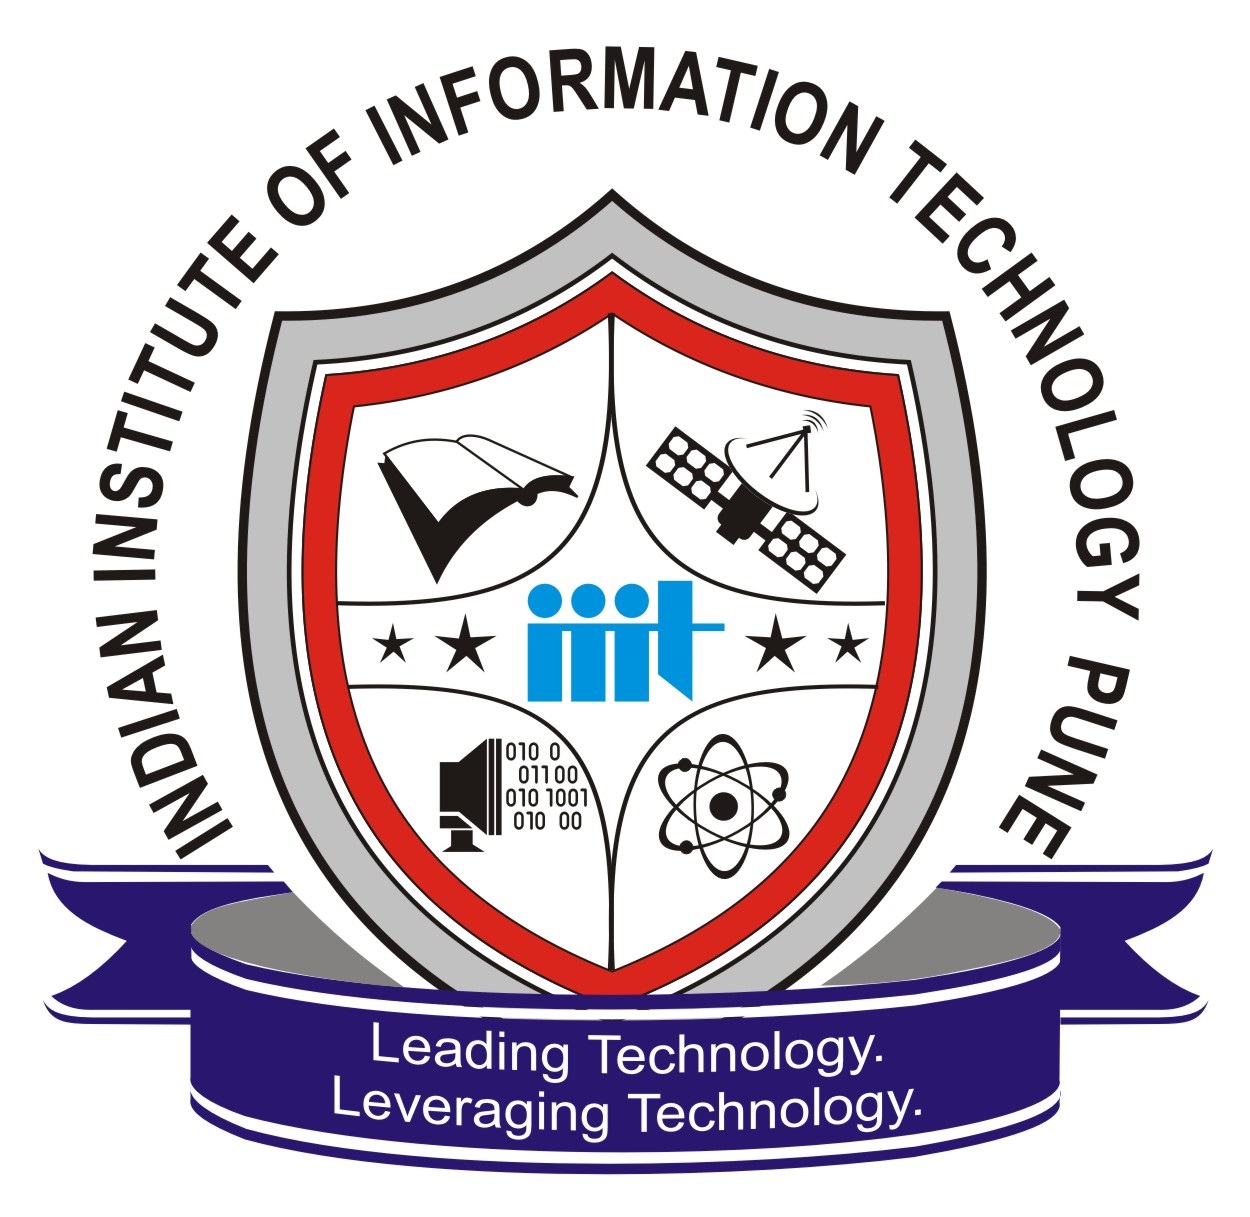 INDIAN INSTITUTE OF INFORMATION TECHNOLOGY, PUNE